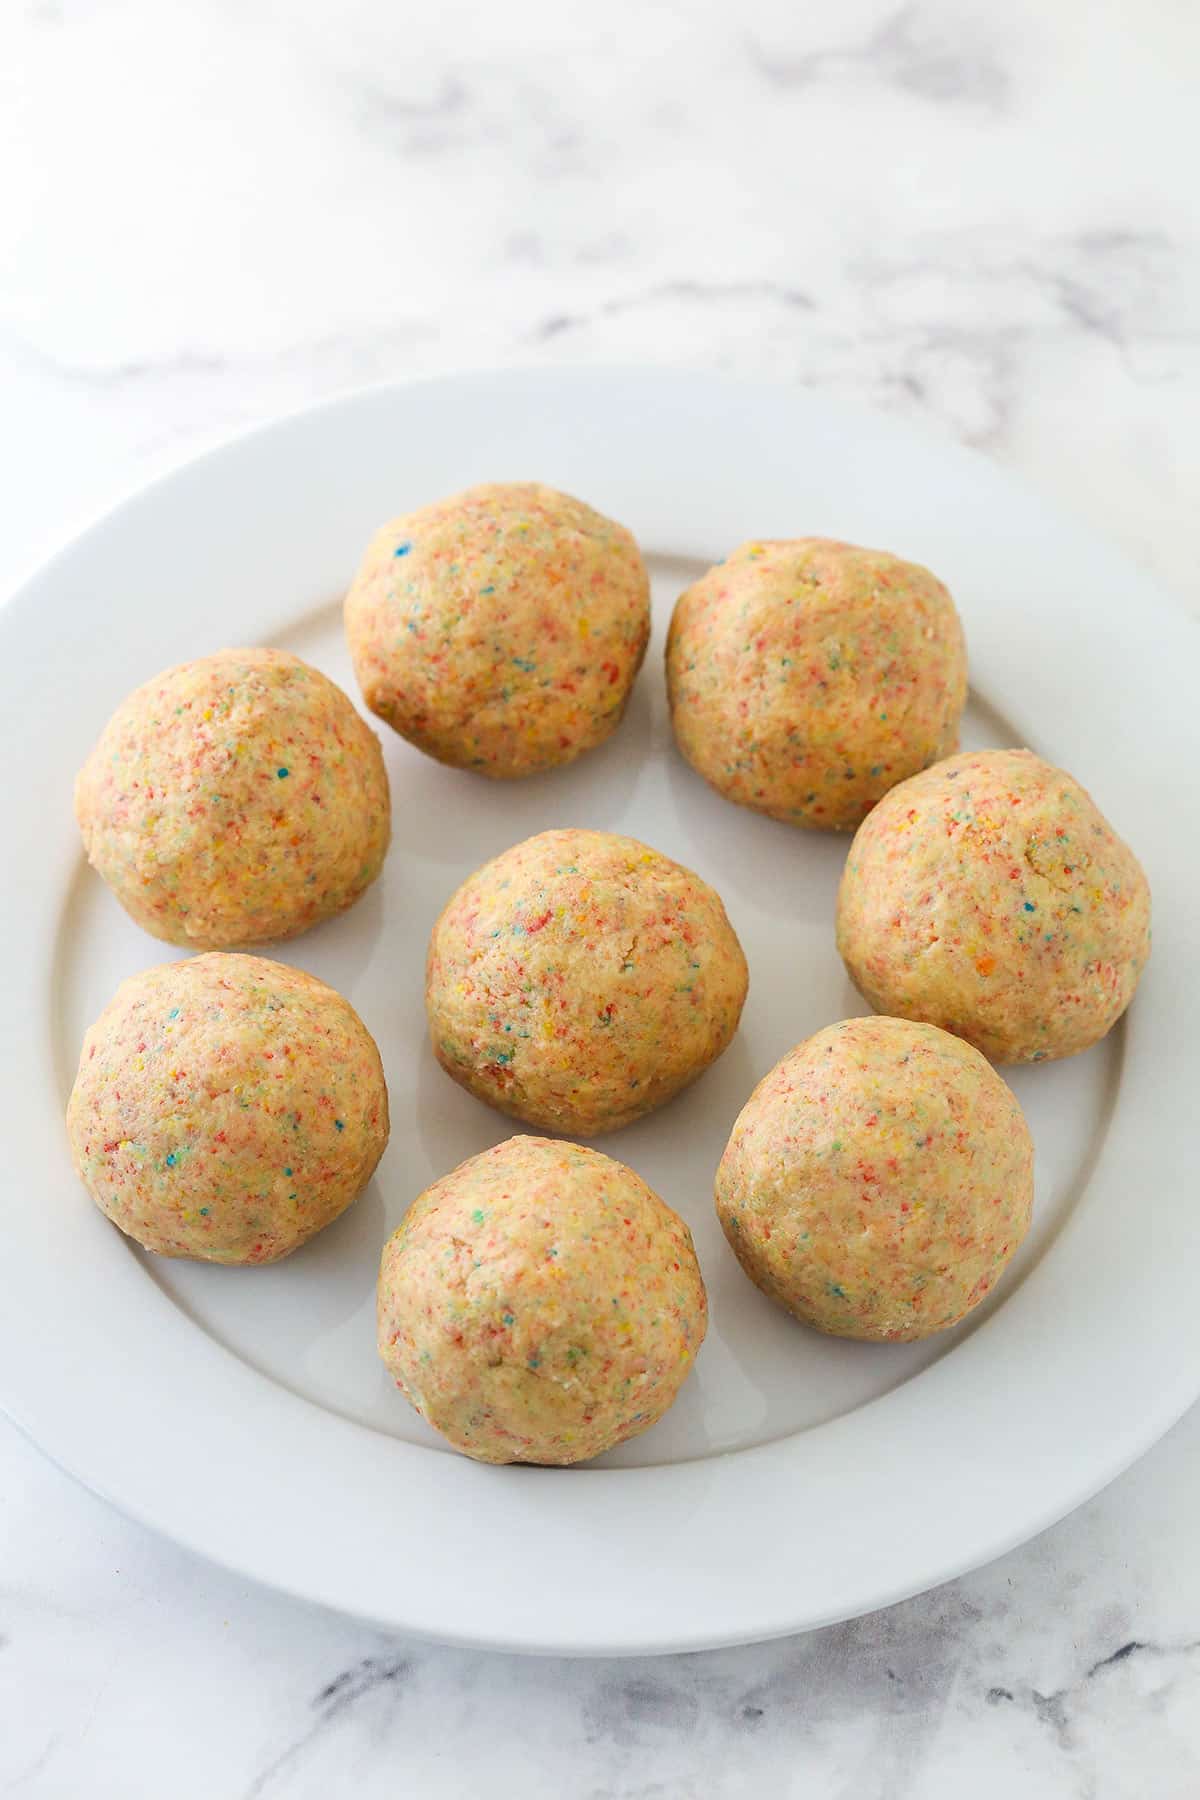 Dough for Fruity Pebbles cookies rolled into balls and arranged on a plate.